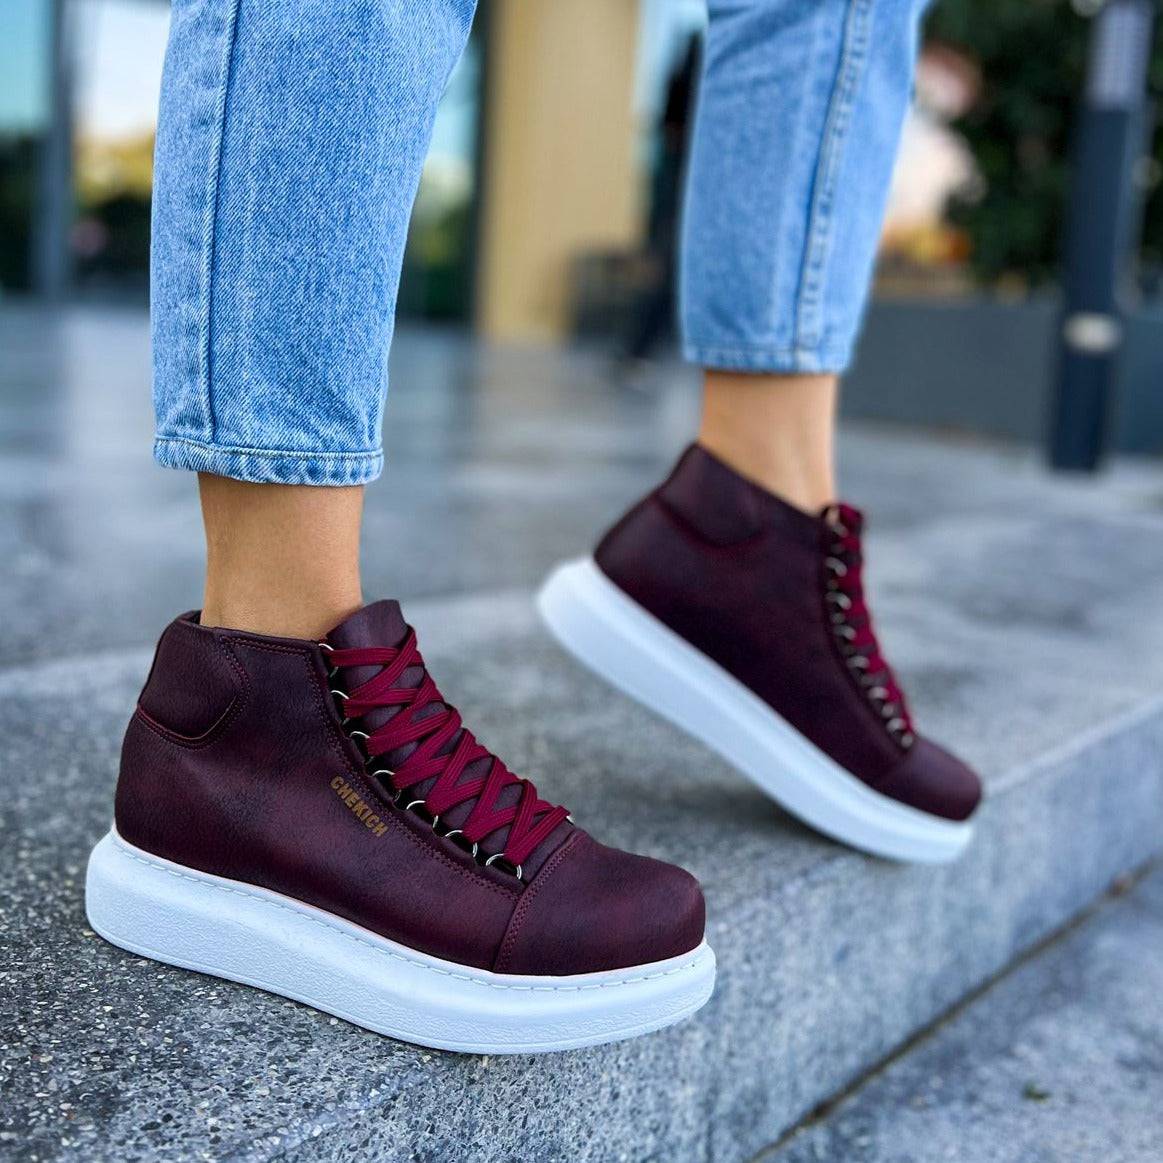 High Top Platform Sneakers for Women by Apollo Moda | Kelly Bordeaux Brilliance